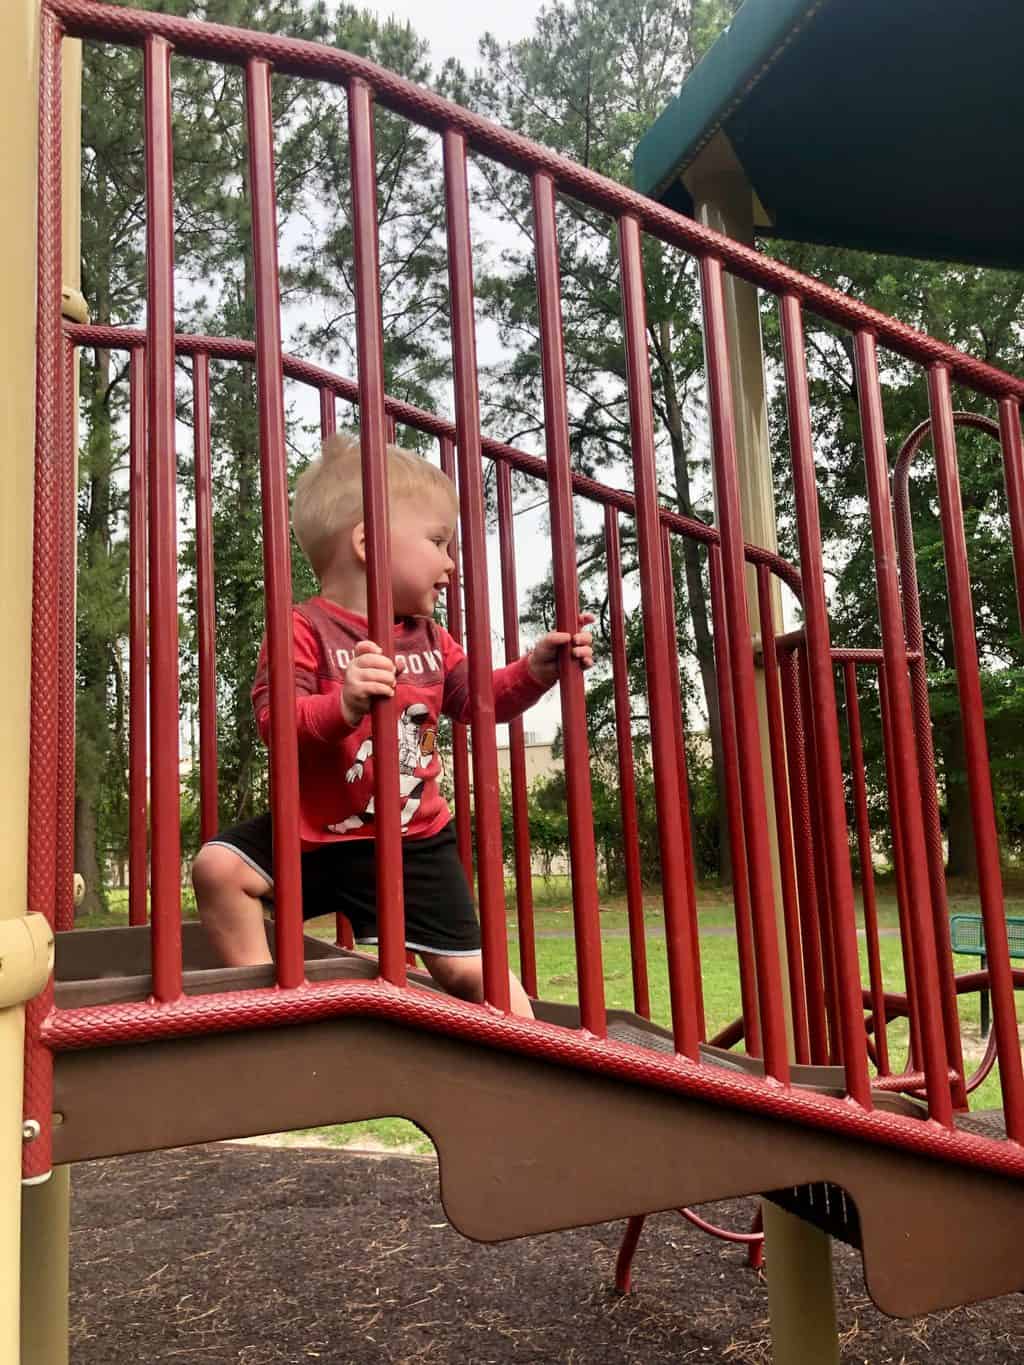 spear playing on playground